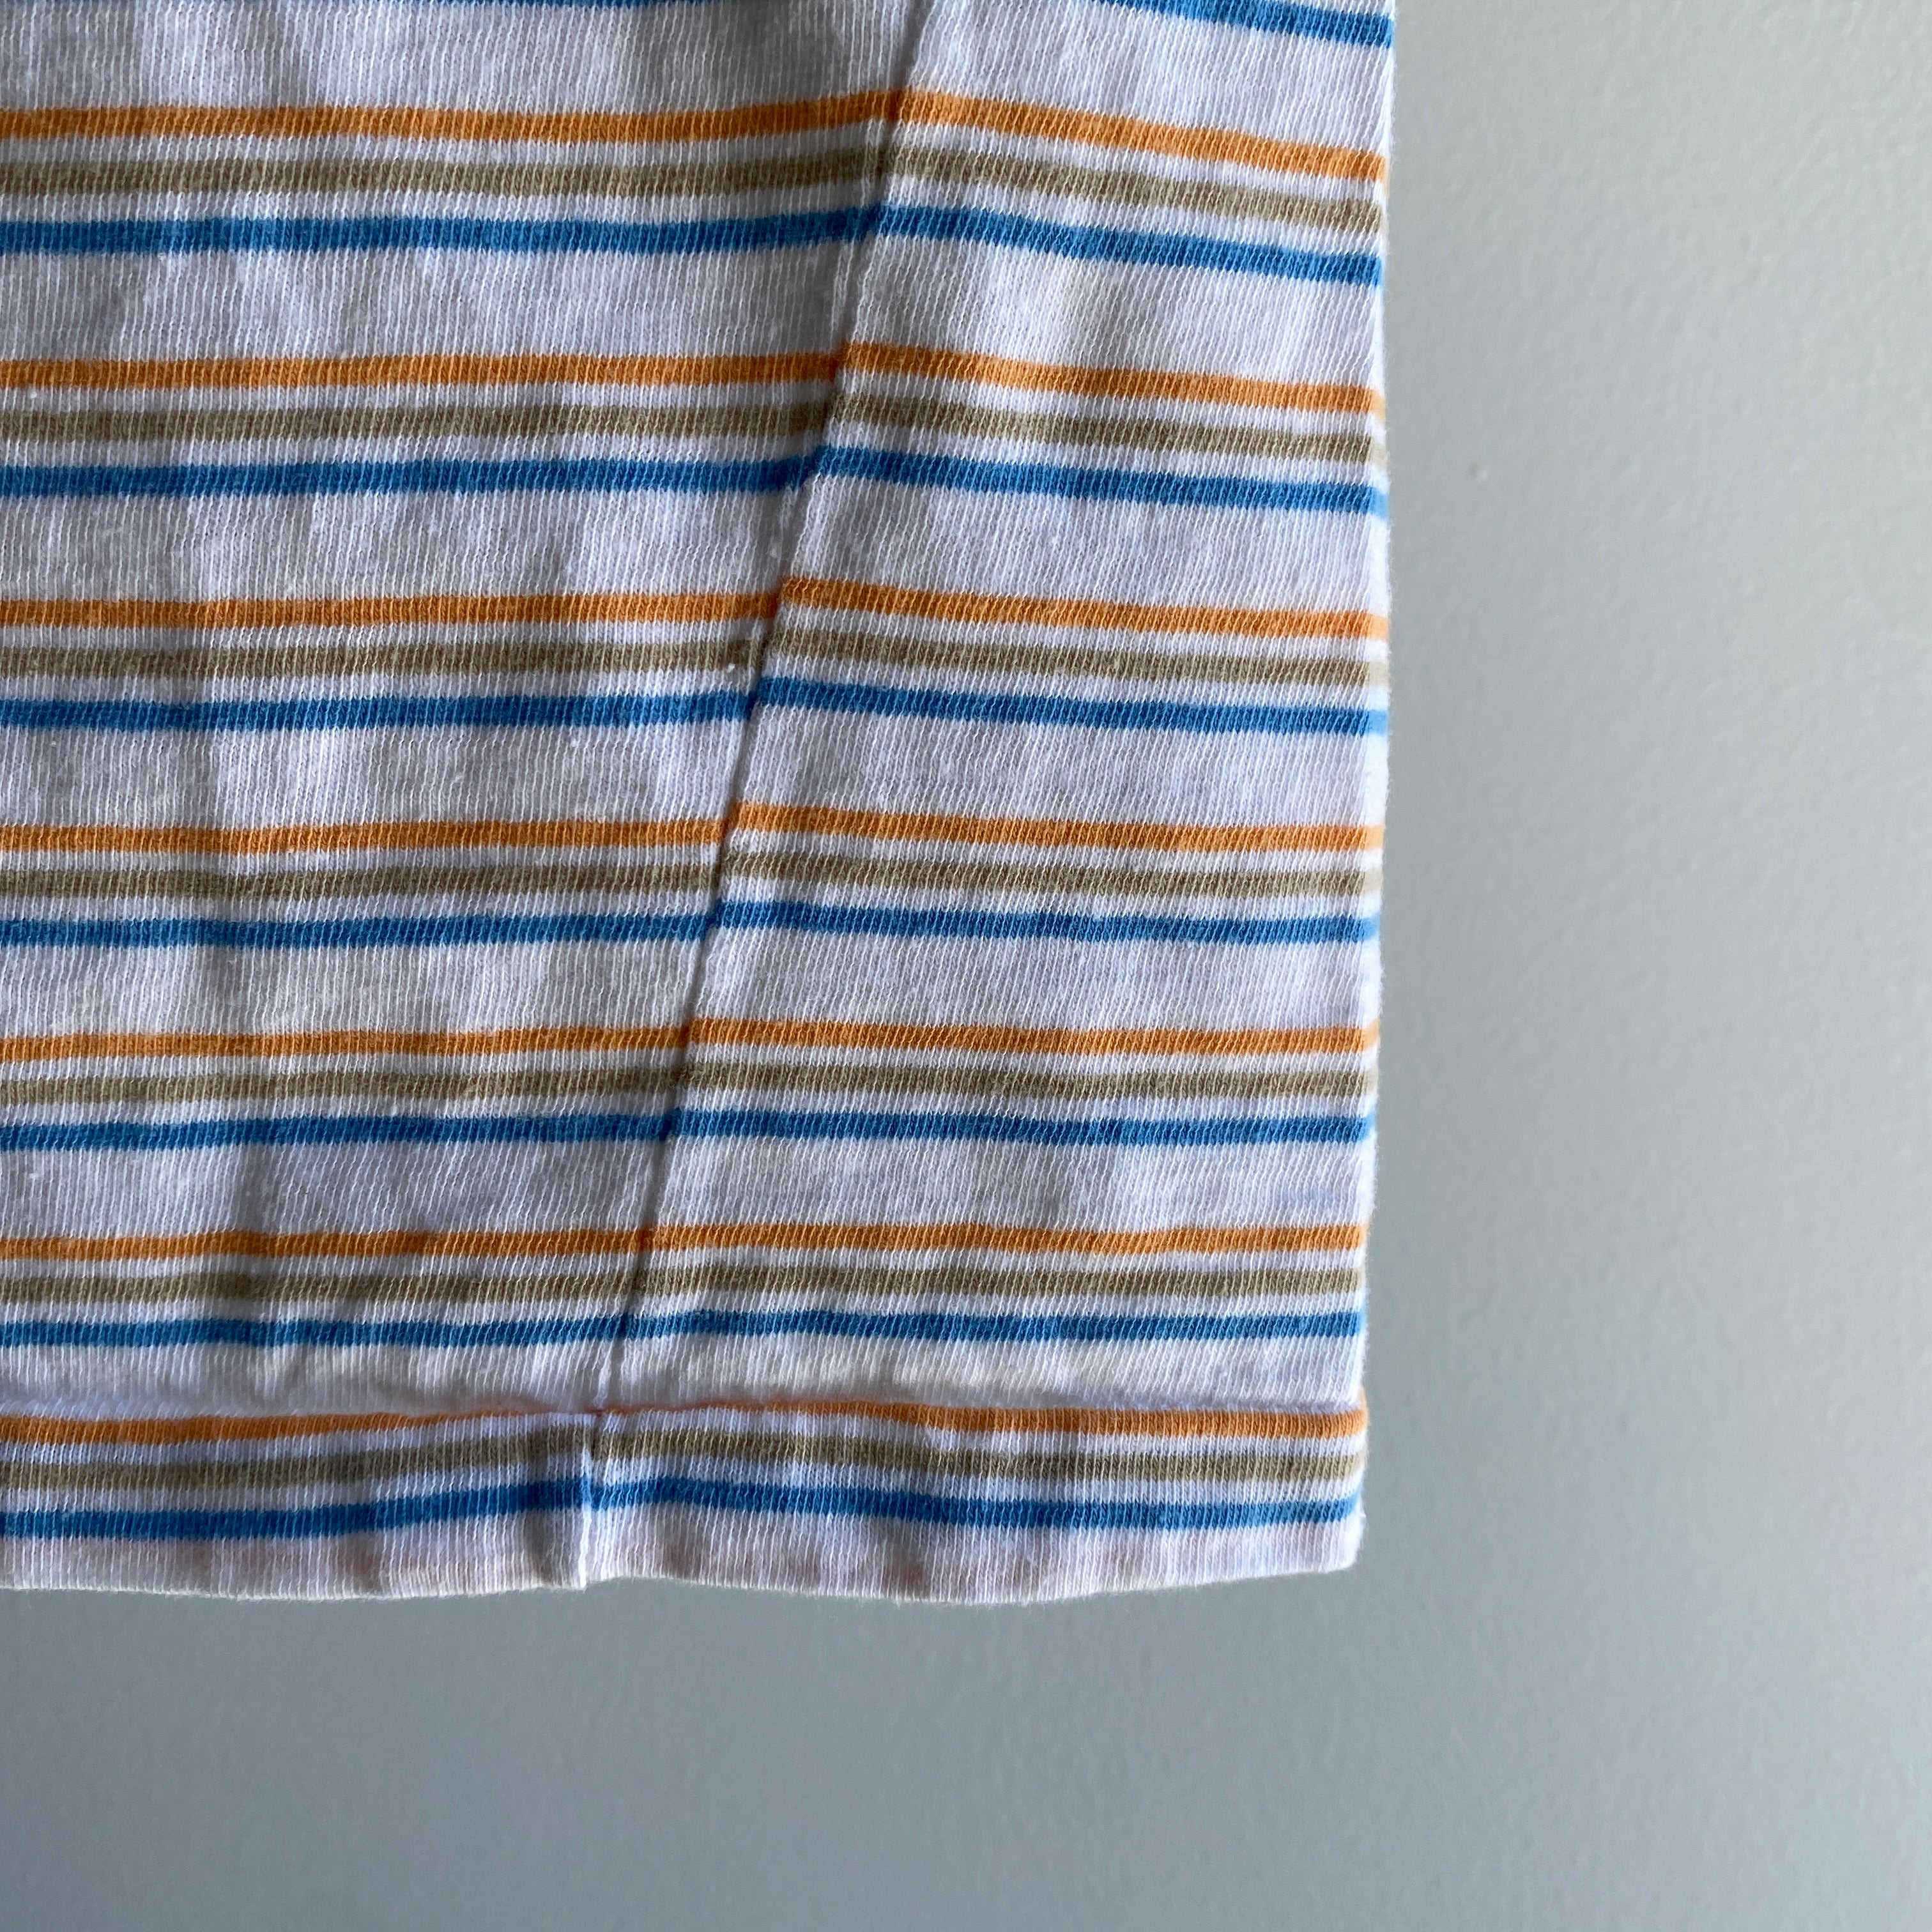 1980s Great Striped Cotton Tank Top